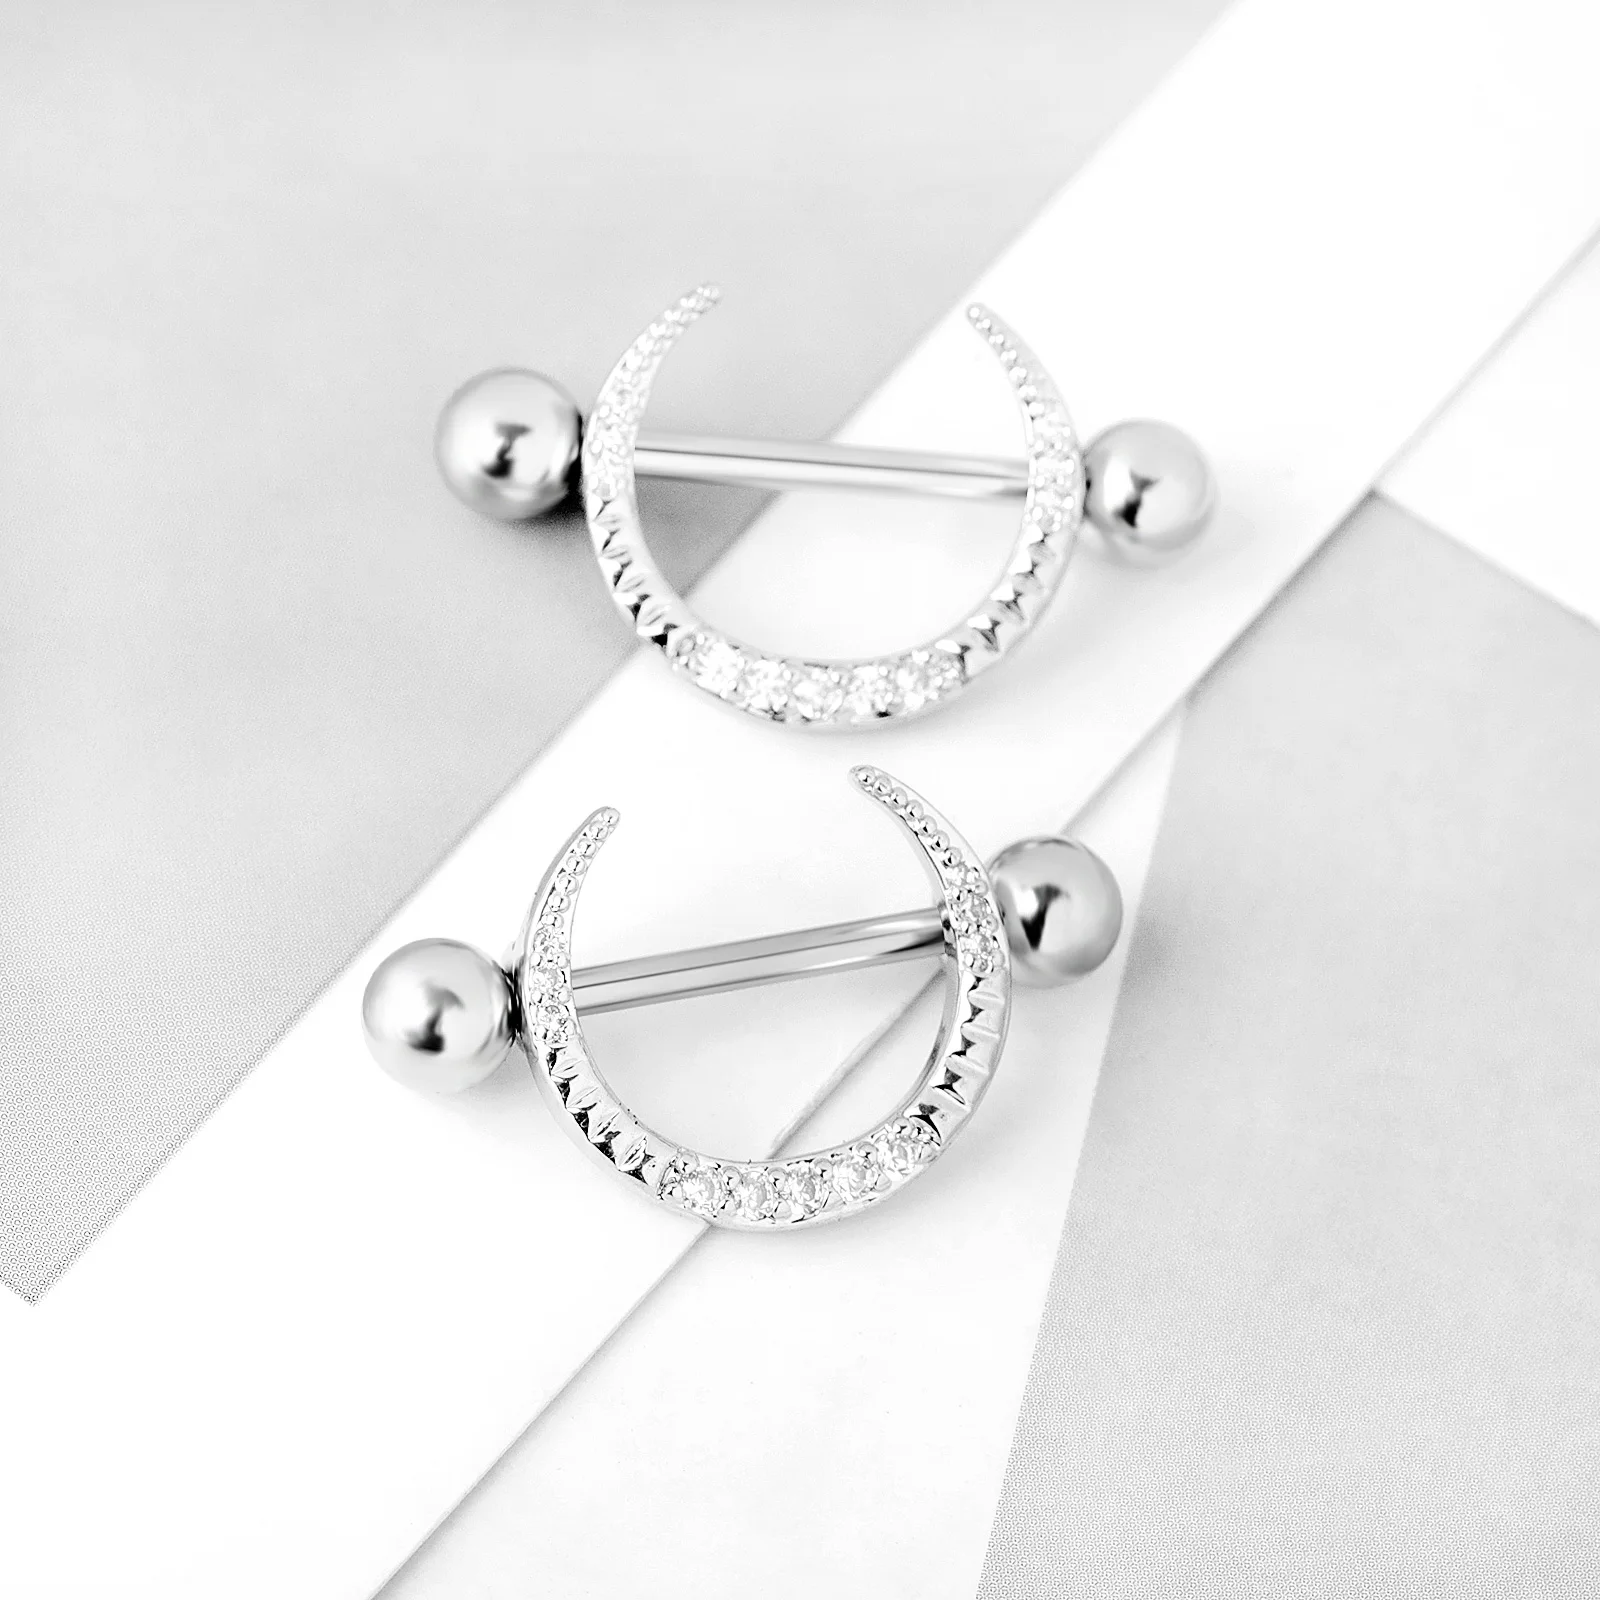 1 Pair Stainless Steel Nipple Piercing Crescent Shaped Diamond Studded Punk Style Sexy Breast Piercing Jewelry for Woman